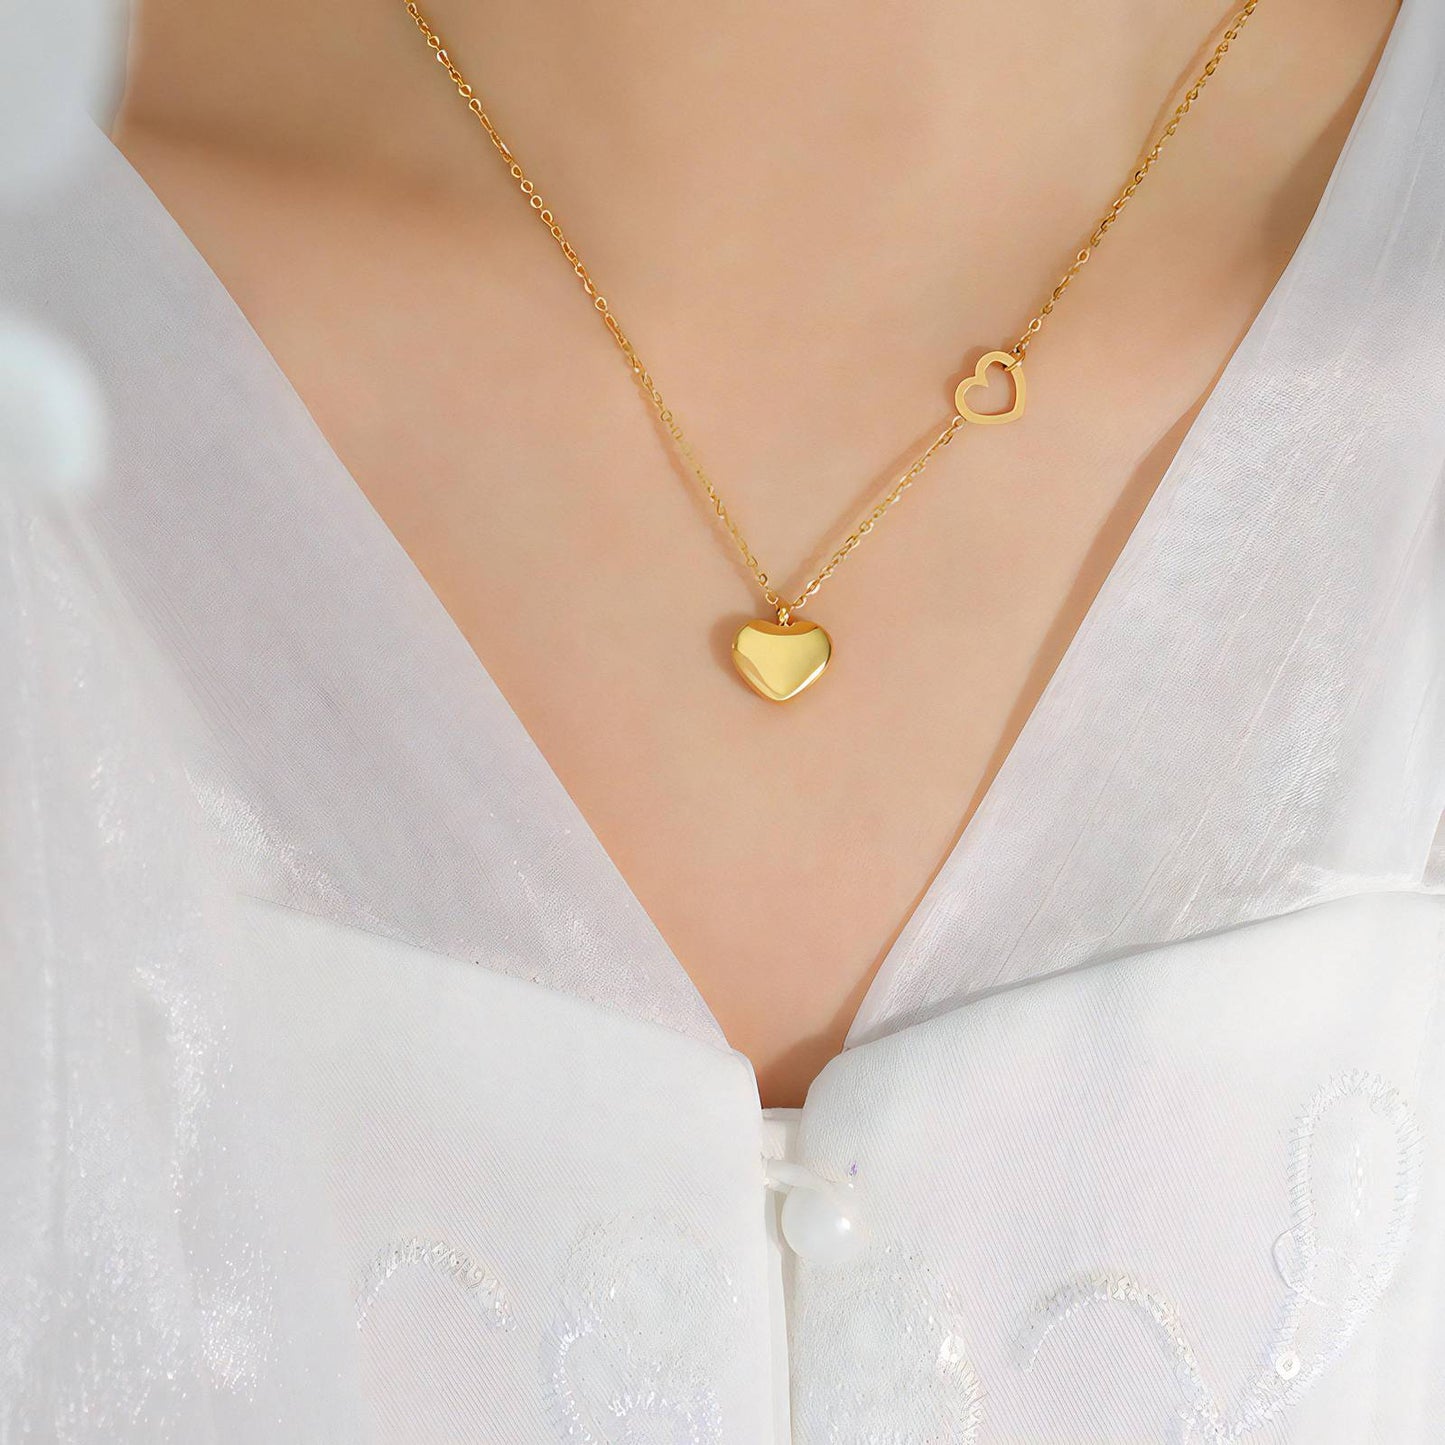 18K GOLD PLATED STAINLESS STEEL "HEARTS" NECKLACE